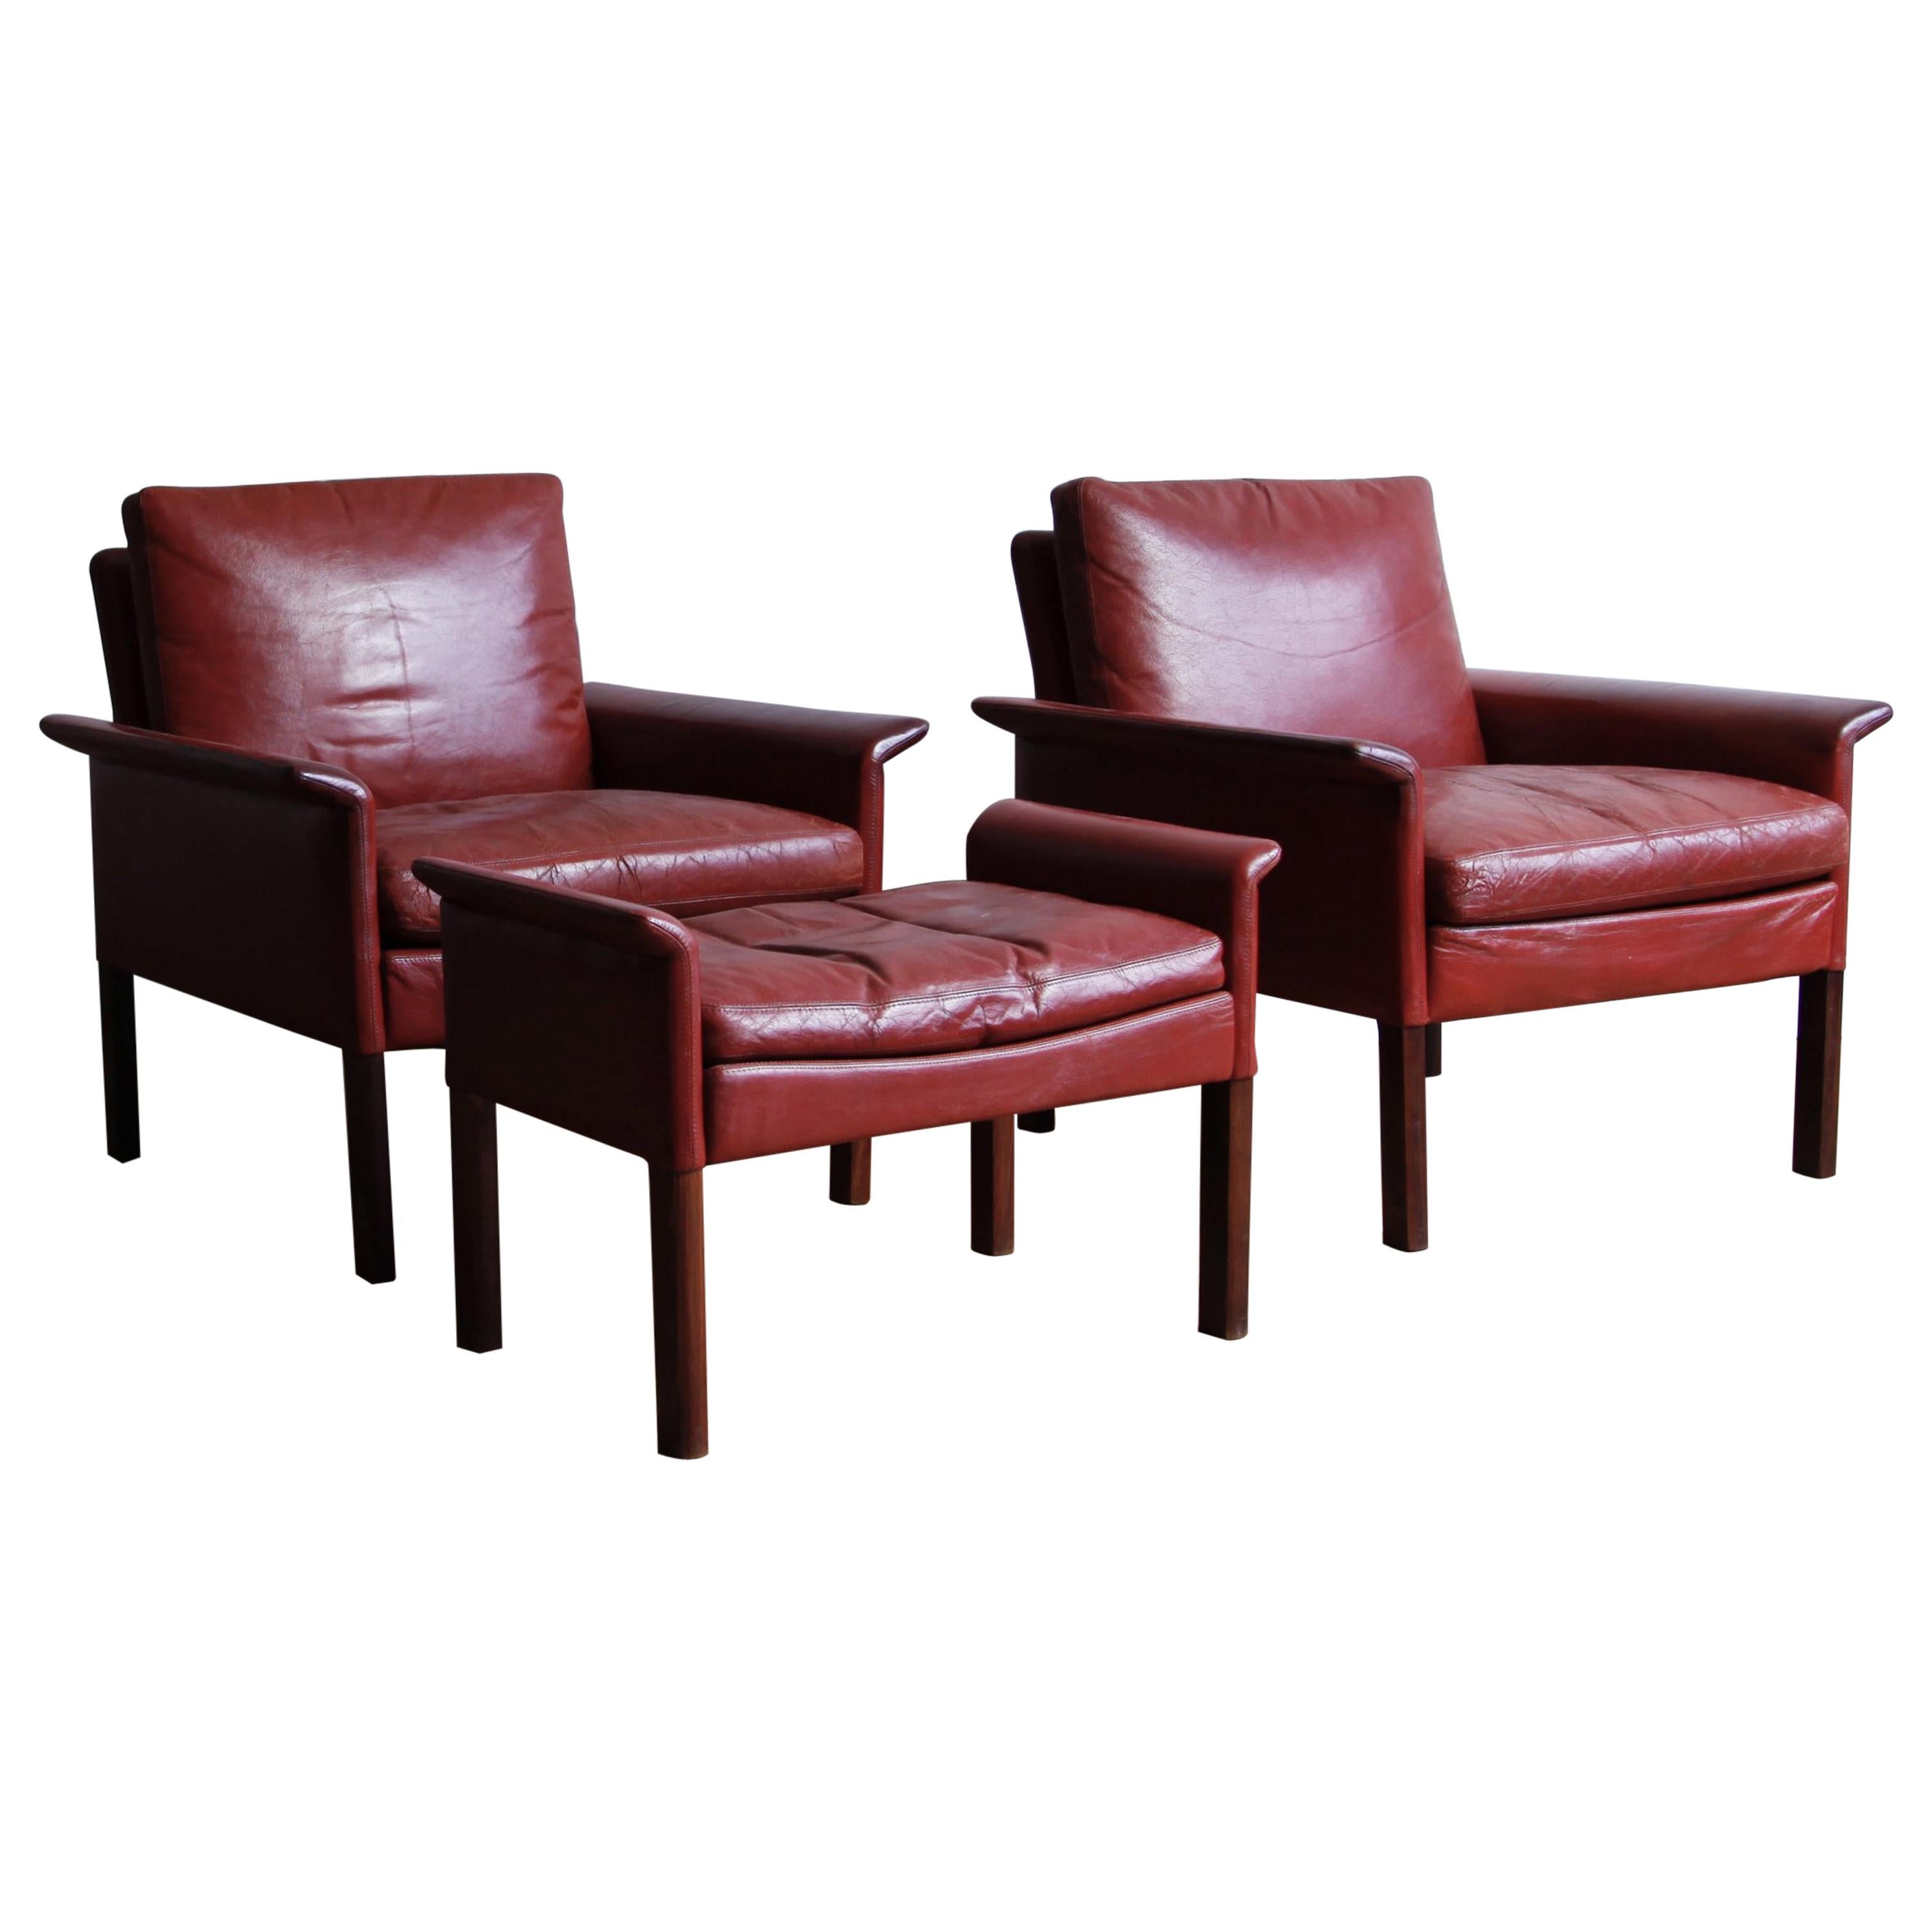 Hans Olsen Rosewood Armchairs and Ottoman in Original Oxblood Leather For Sale